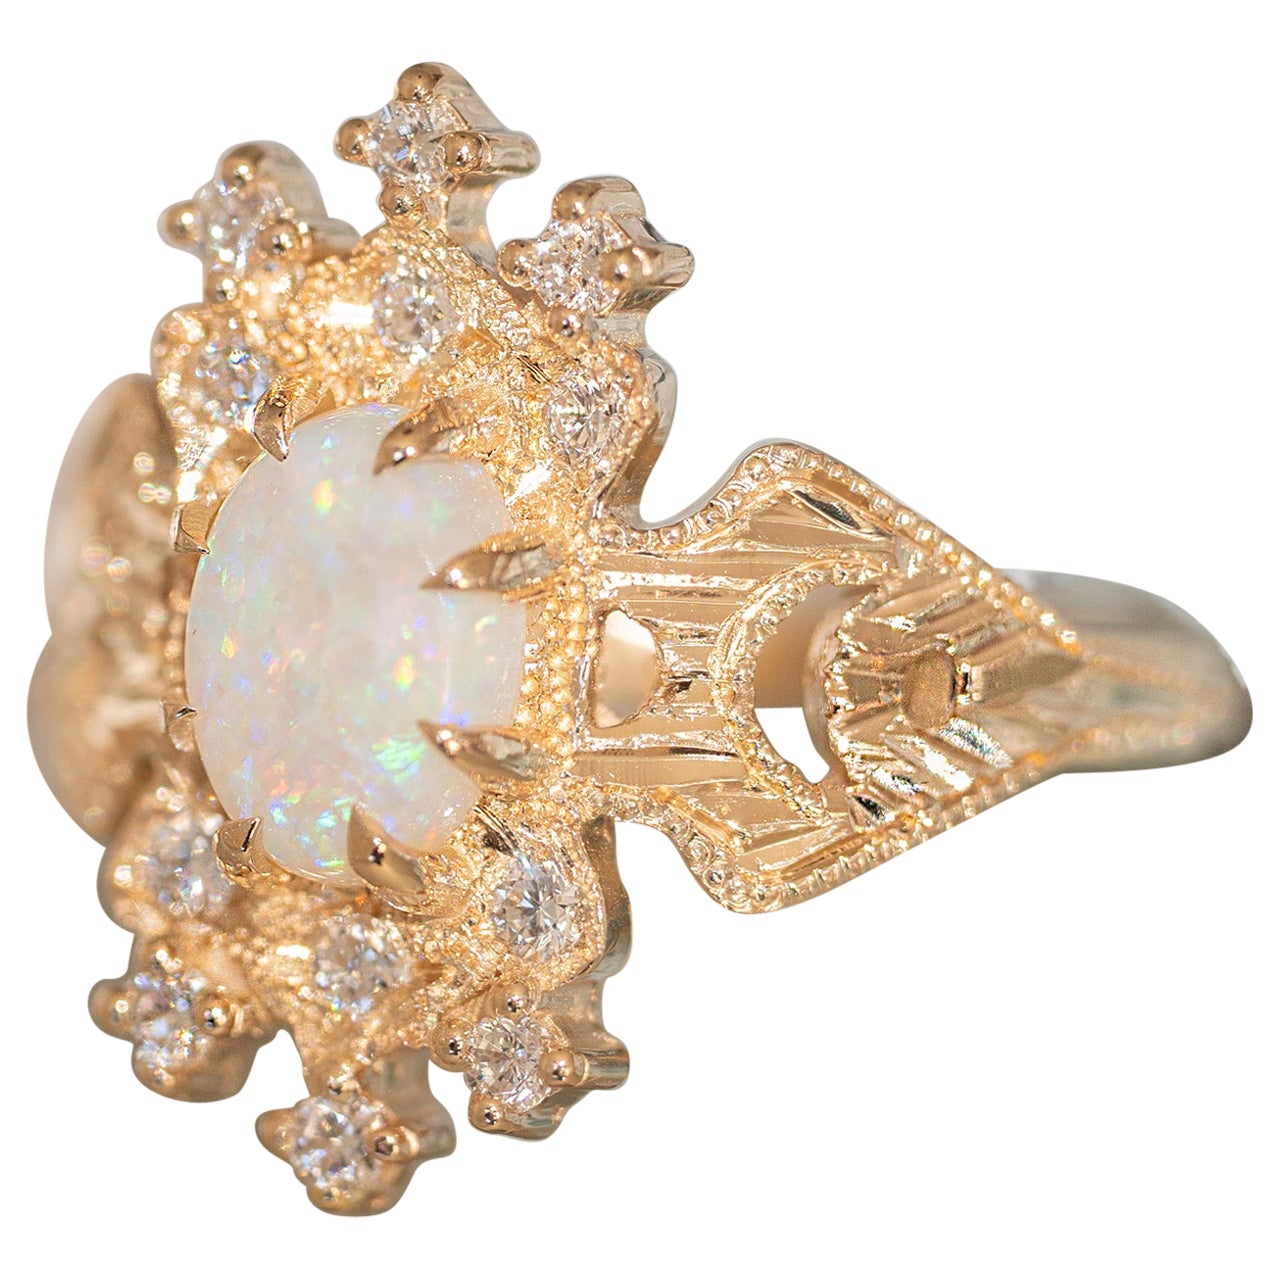 For Sale:  0.7 Carat Australian Opal Diamond Oval Cut Claw Prong Moon Crescent Lullaby Ring